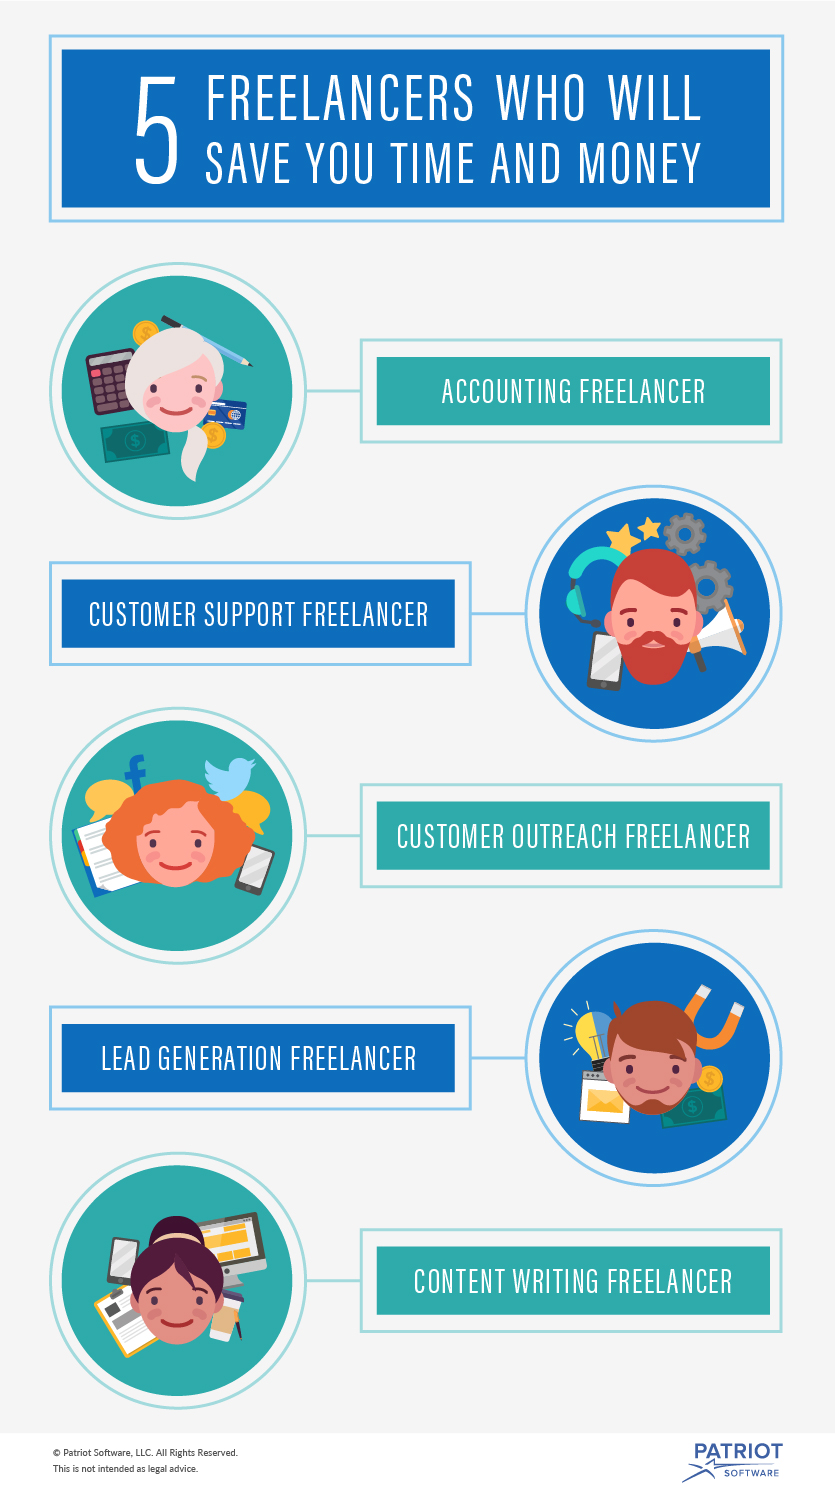 Freelancers who will save you time and money